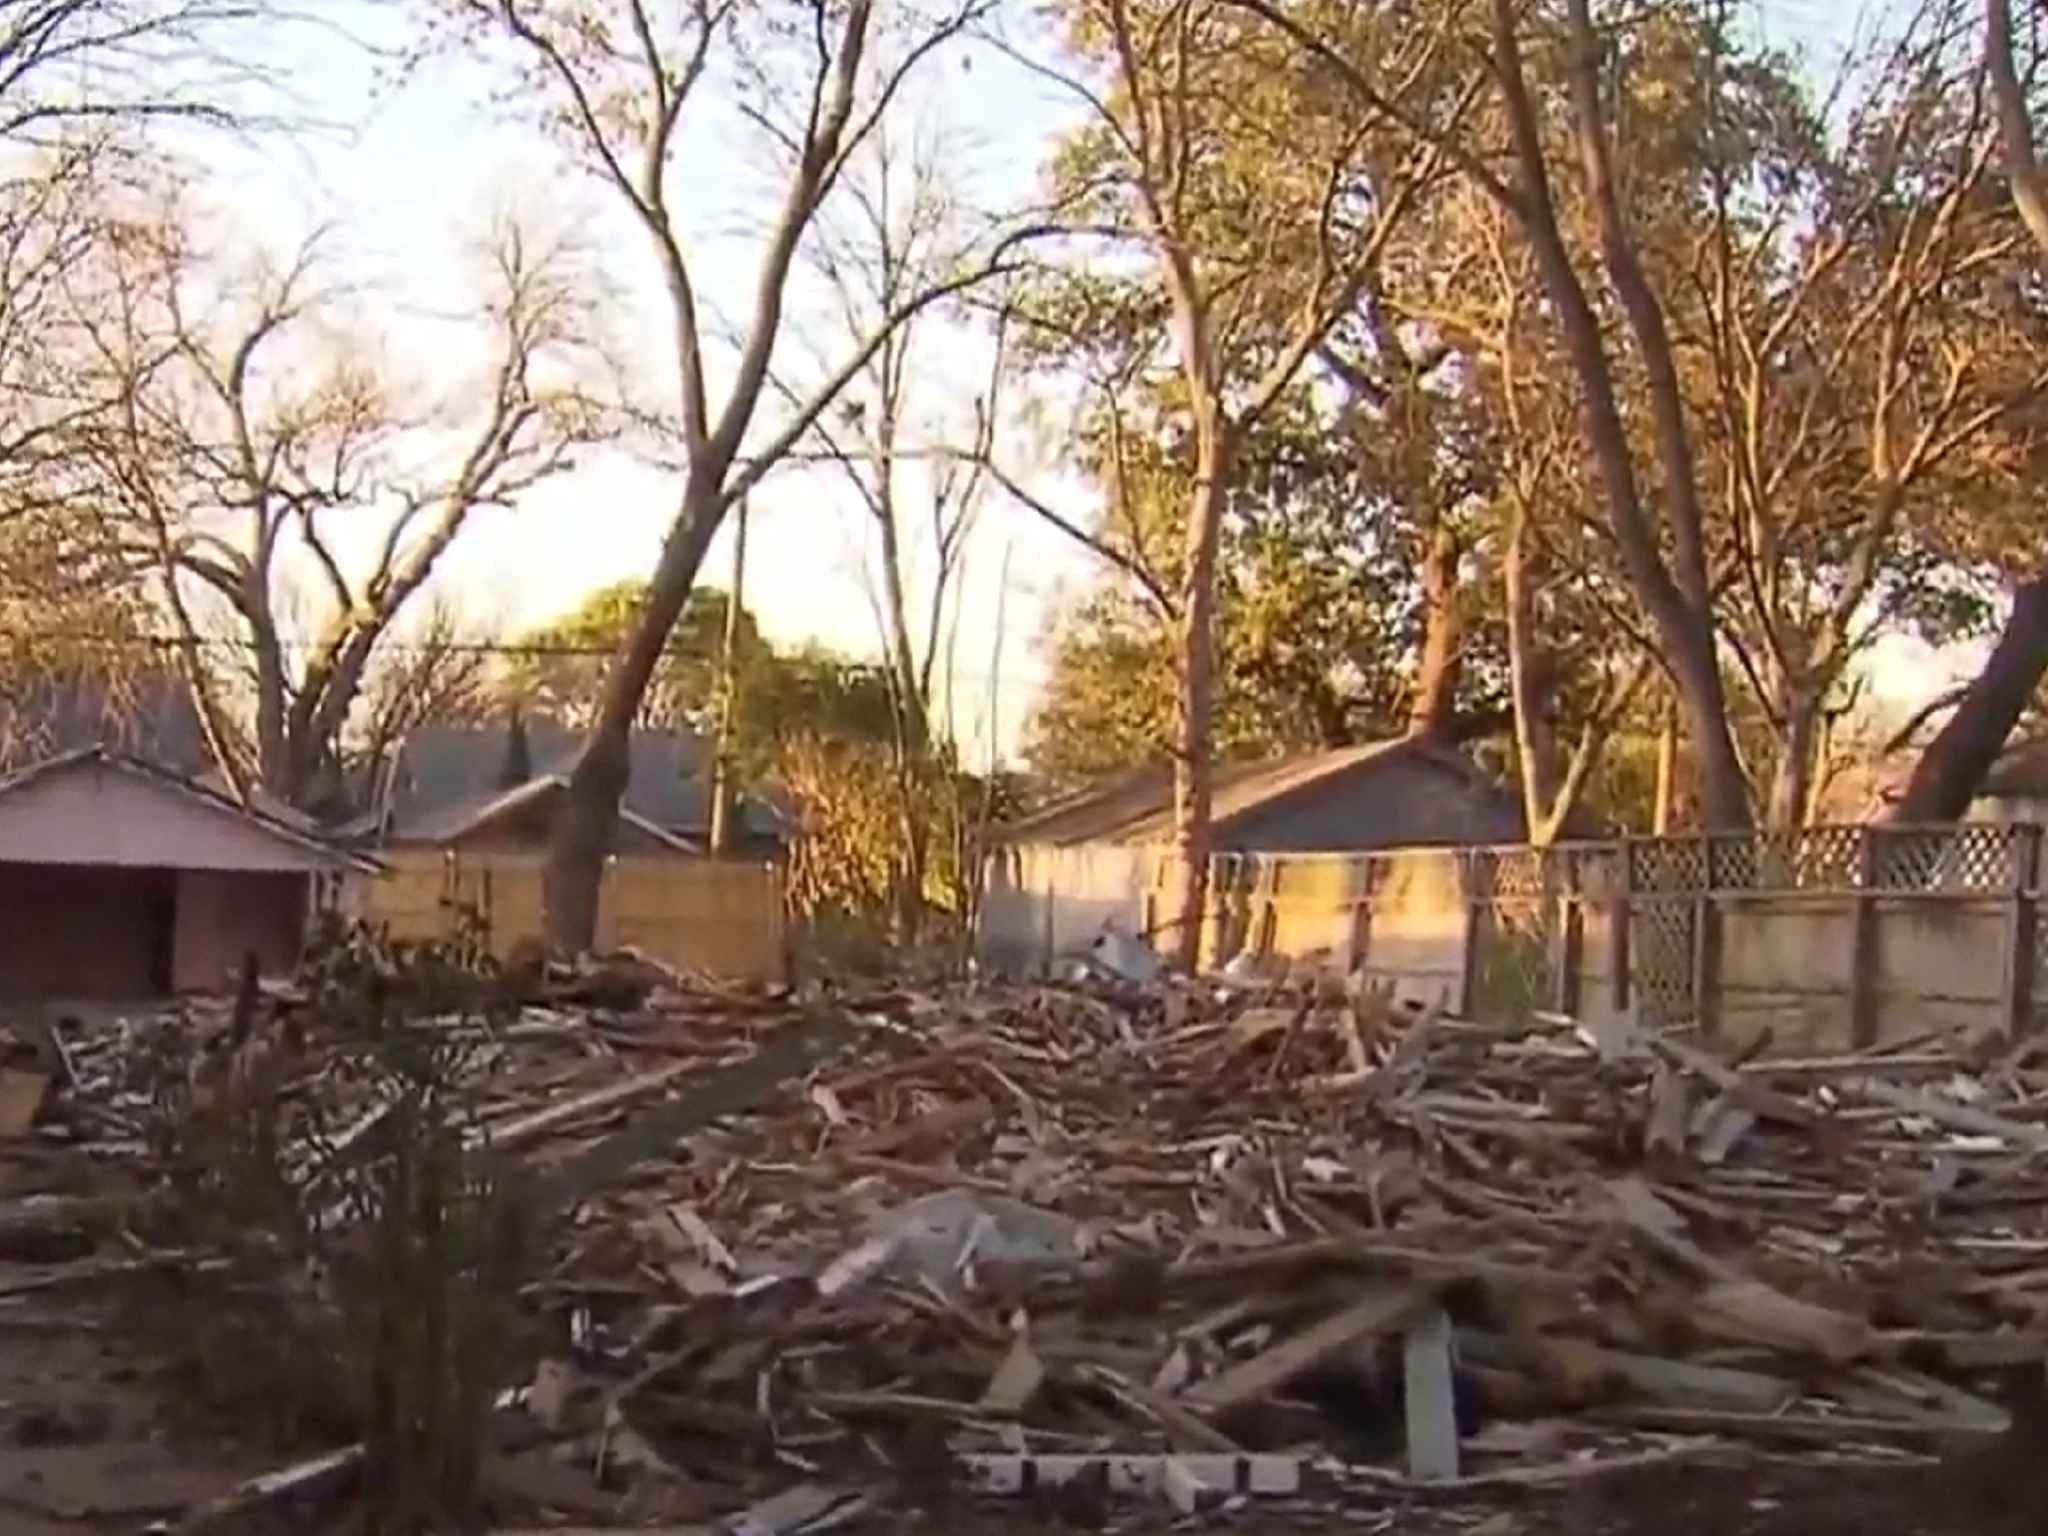 Still image taken from video of a 97-year-old house in the historic neighbourhood of Vickory Place, Dallas, US, which was accidentally demolished instead of another house.